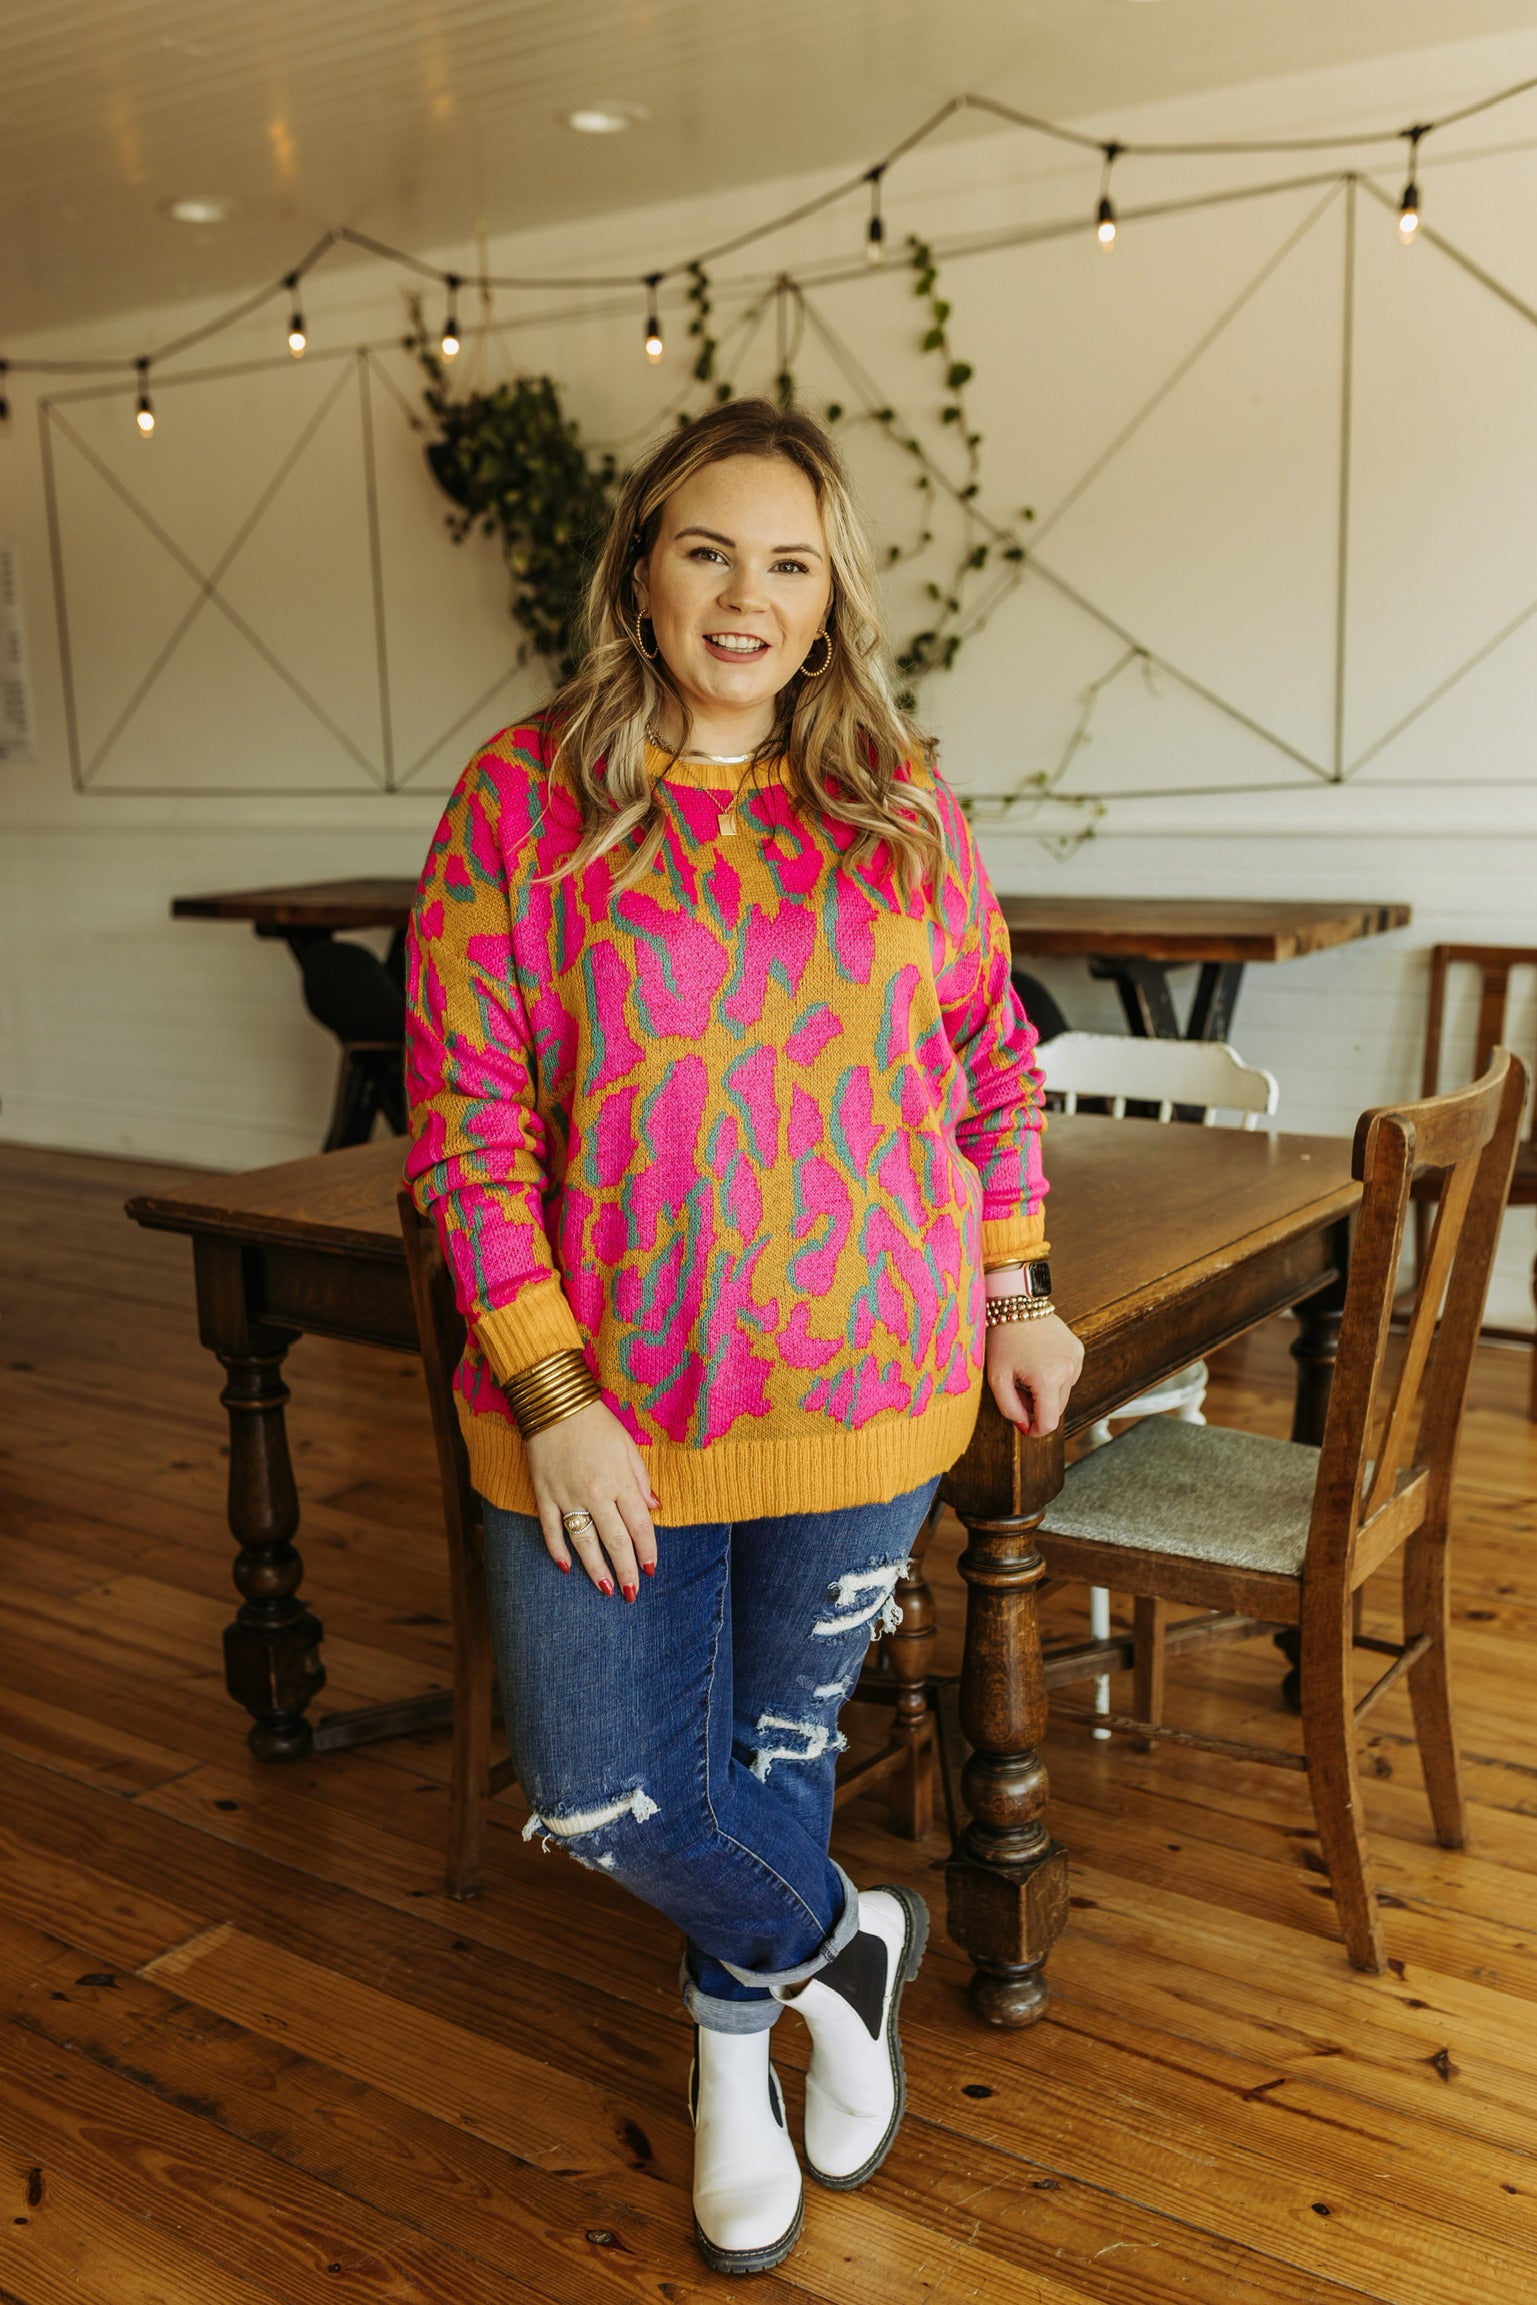 No Hesitation Animal Print Long Sleeve Sweater in Yellow and Neon Pink - Giddy Up Glamour Boutique